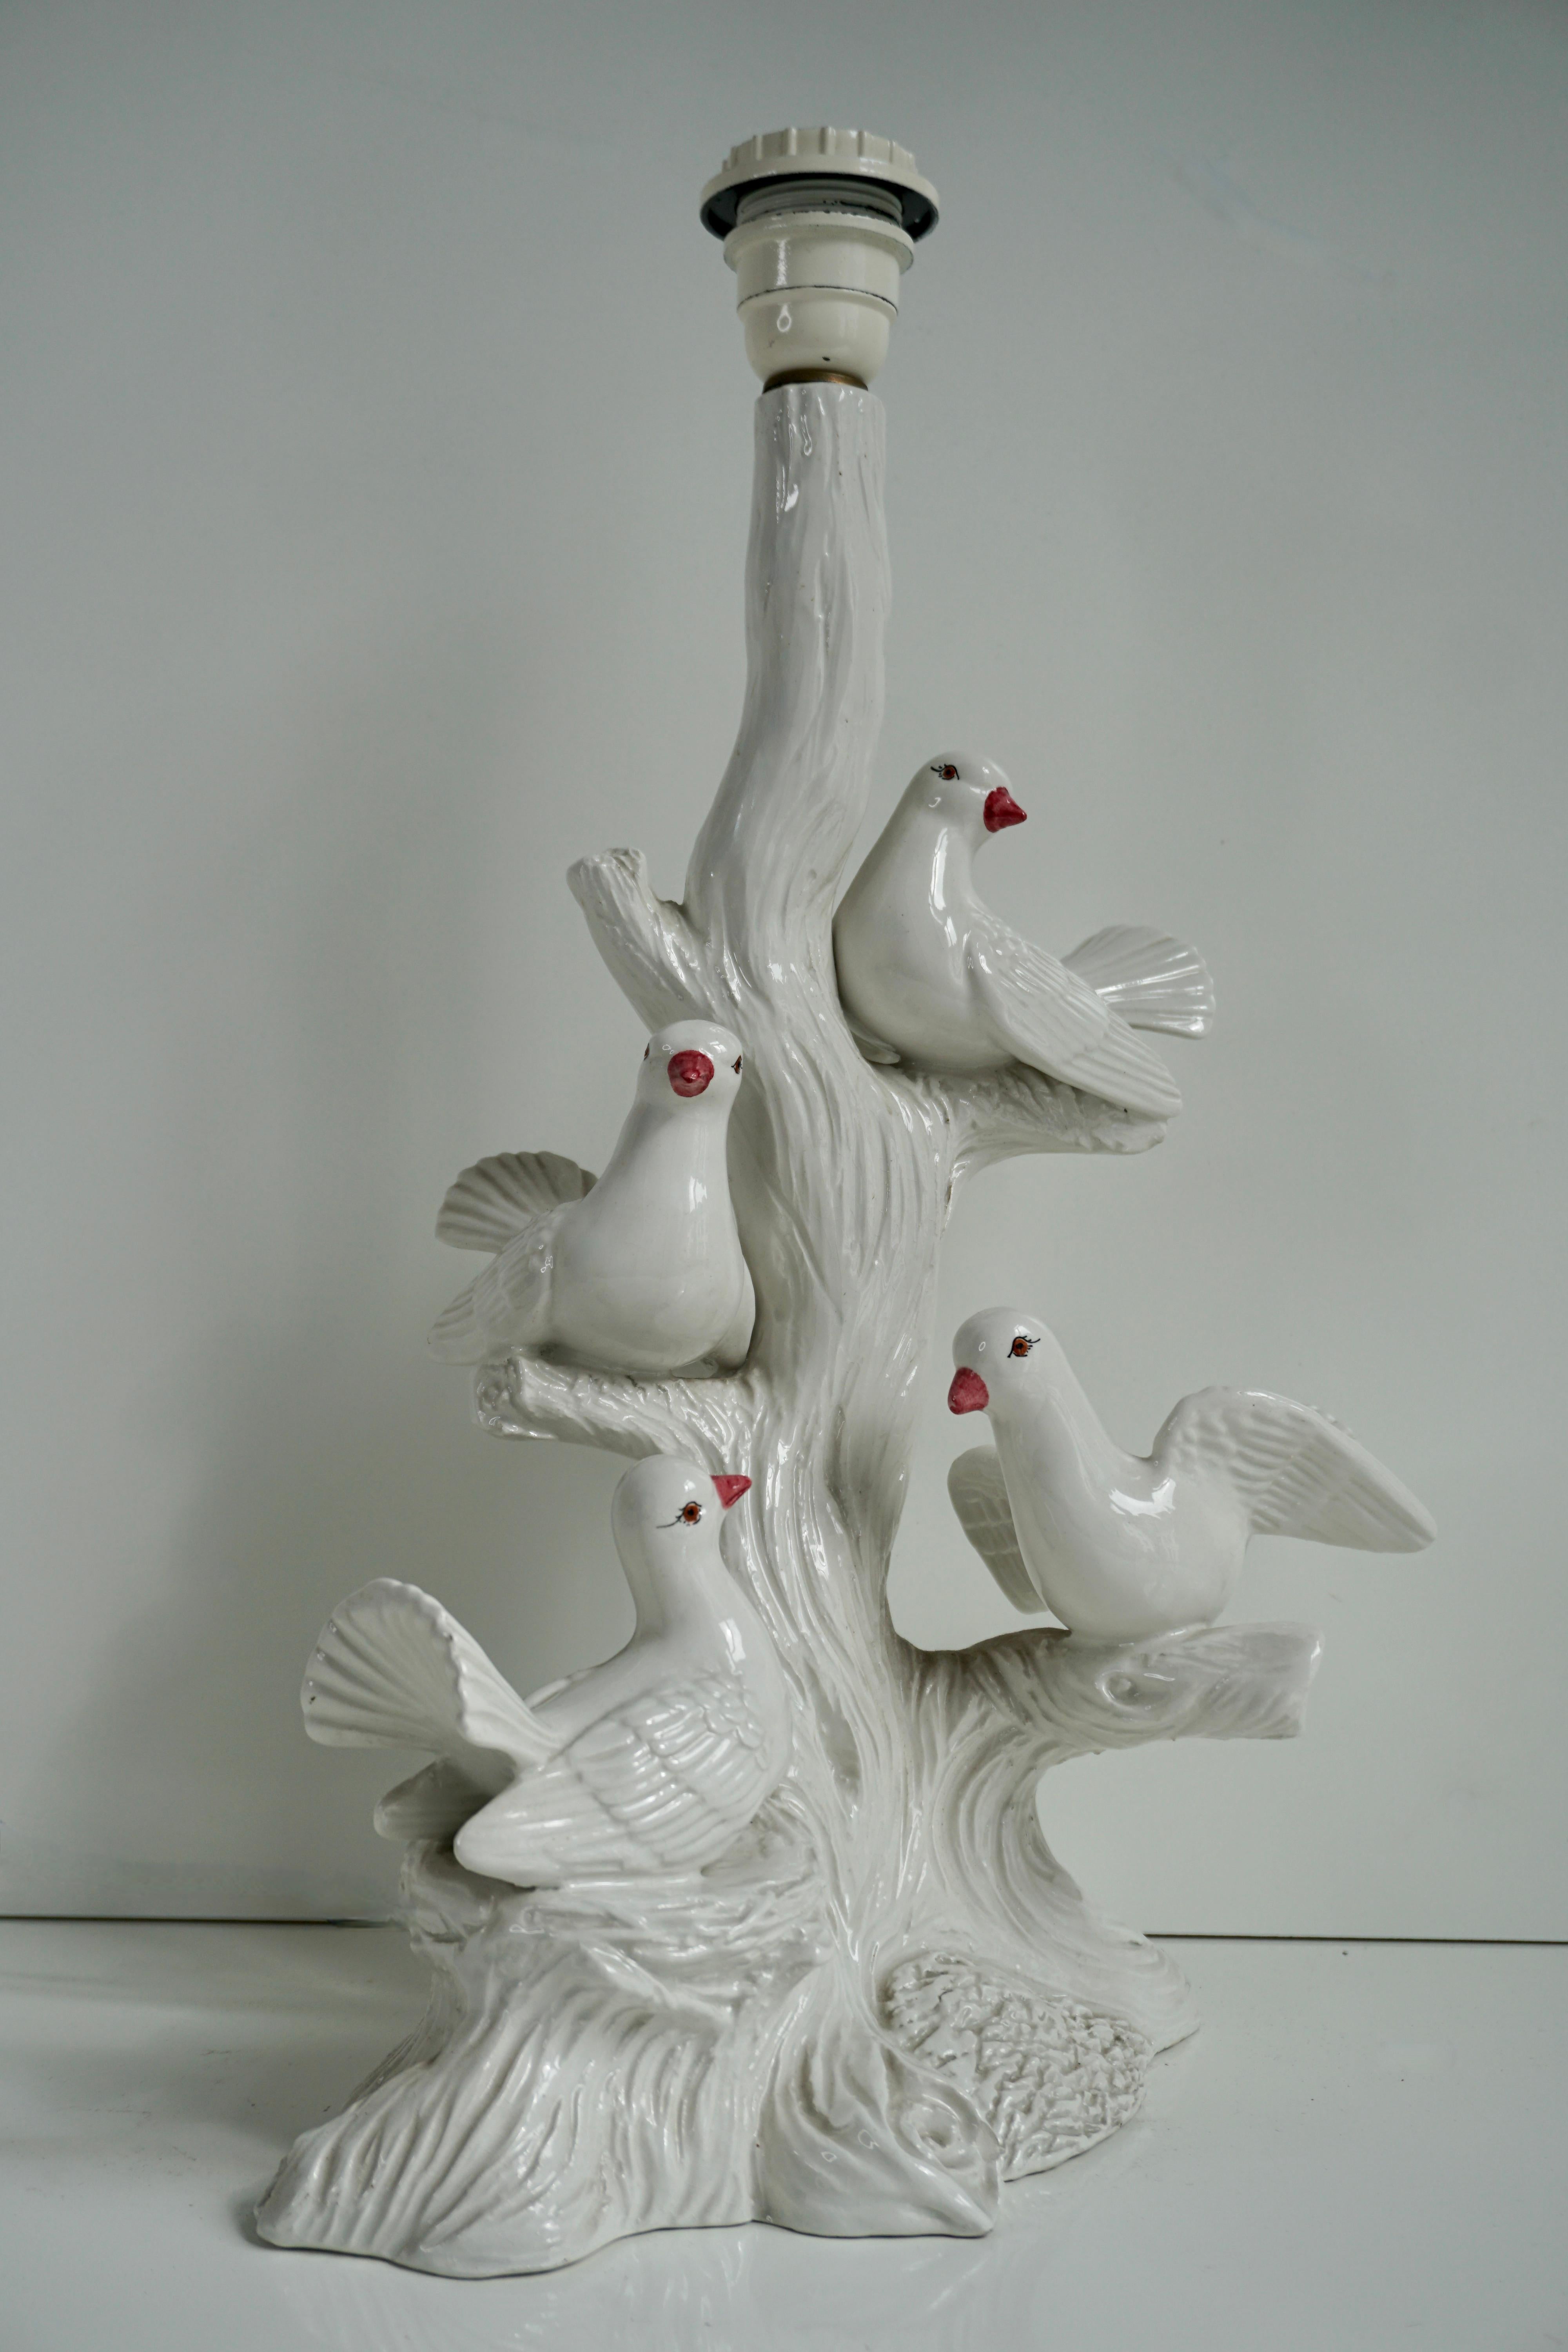 Vintage Italian Ceramic Bird Table Lamp with Doves, 1960s For Sale 1